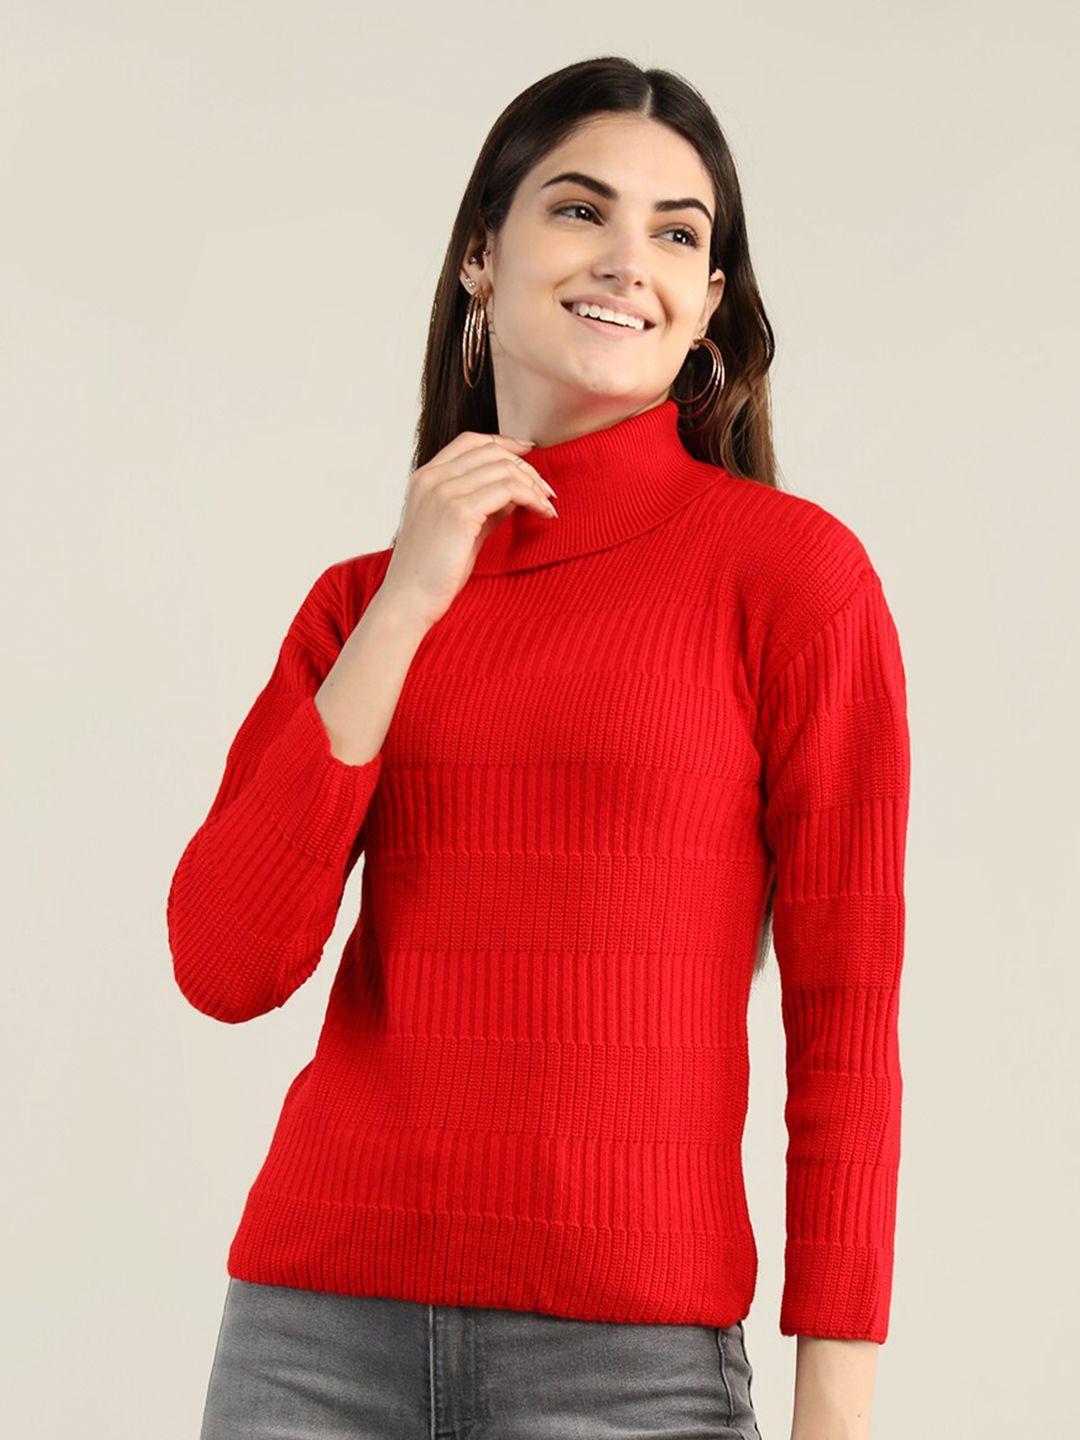 chkokko women red ribbed pullover